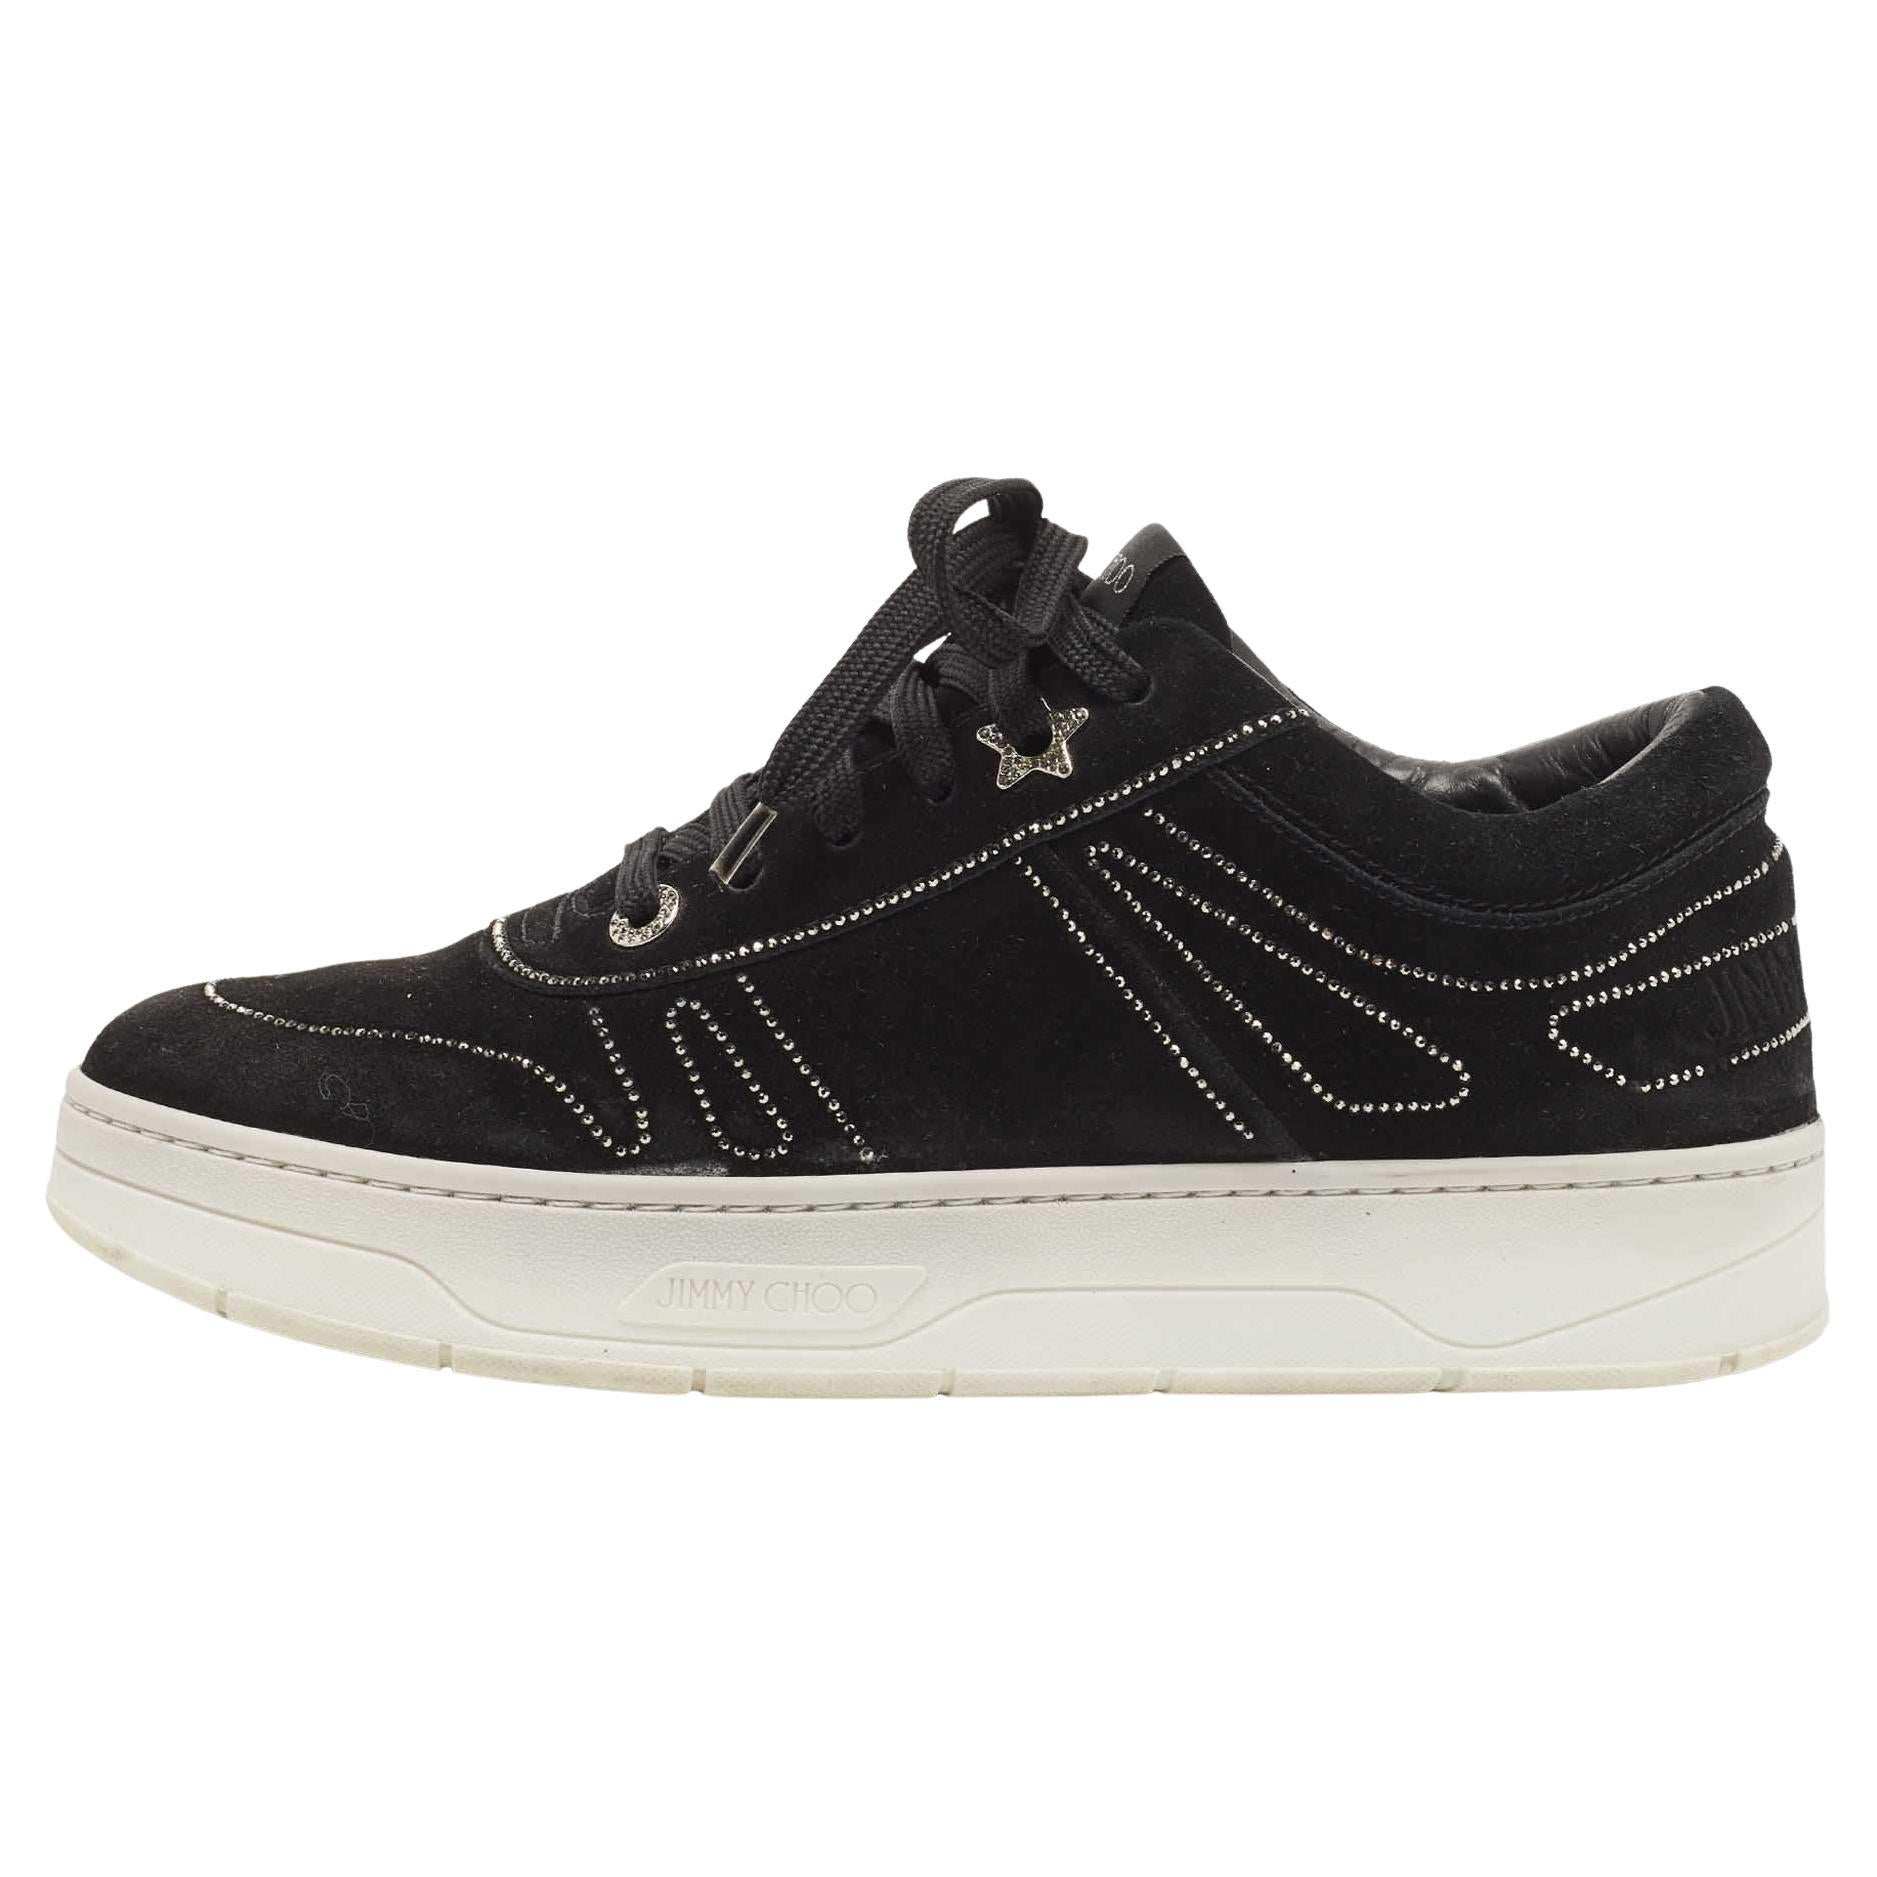 Jimmy Choo Black Suede Embellished Low Top Sneakers Size 40 For Sale